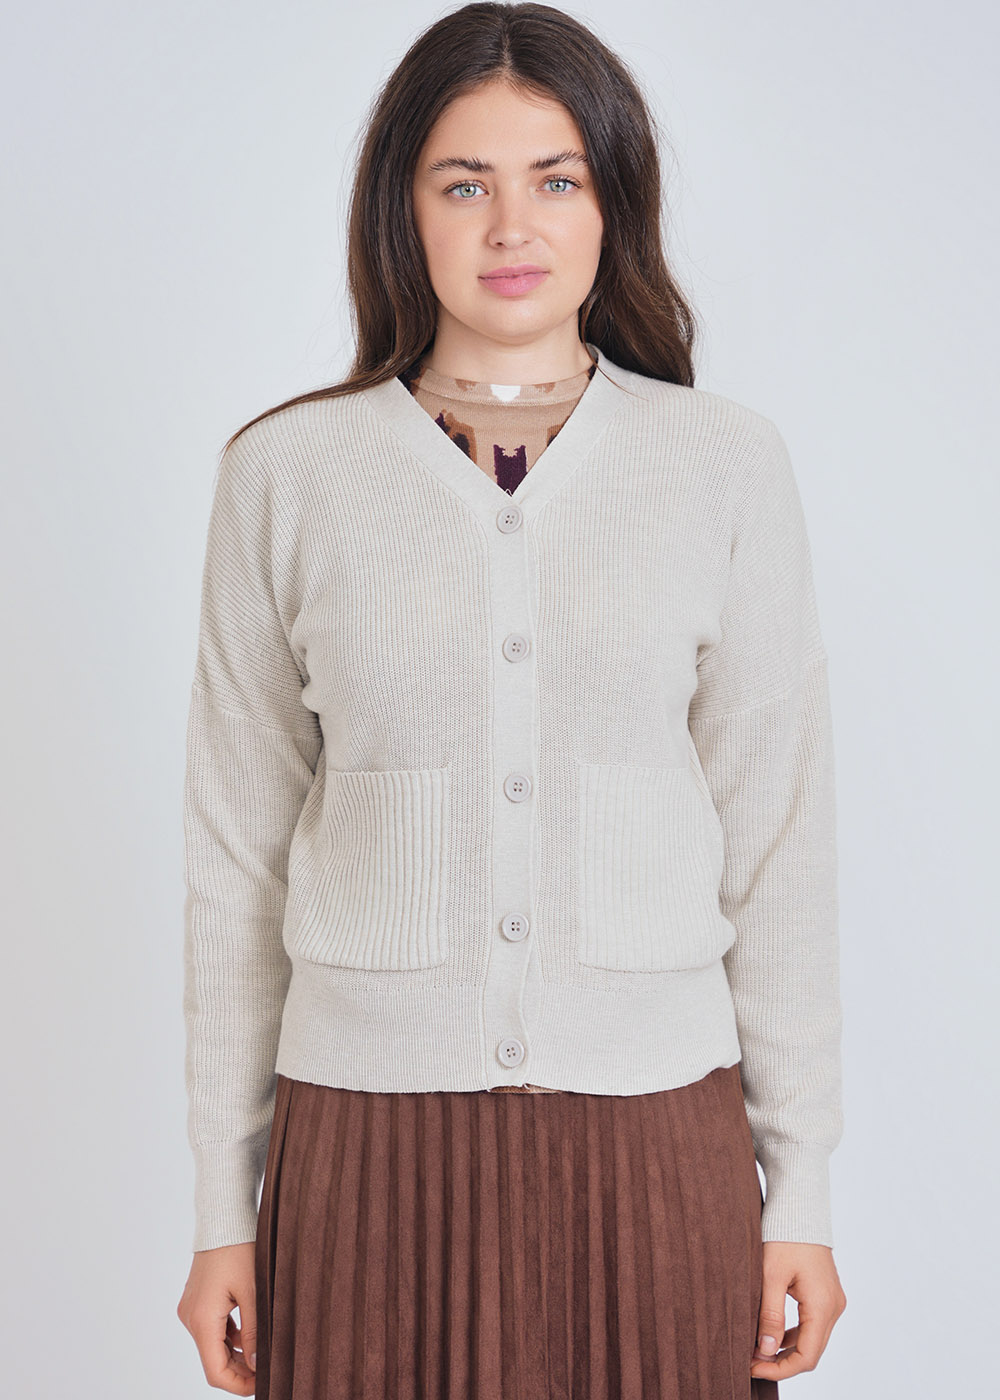 Soft Sand Cardigan: Ribbed Detail, Button Closure, and Pockets